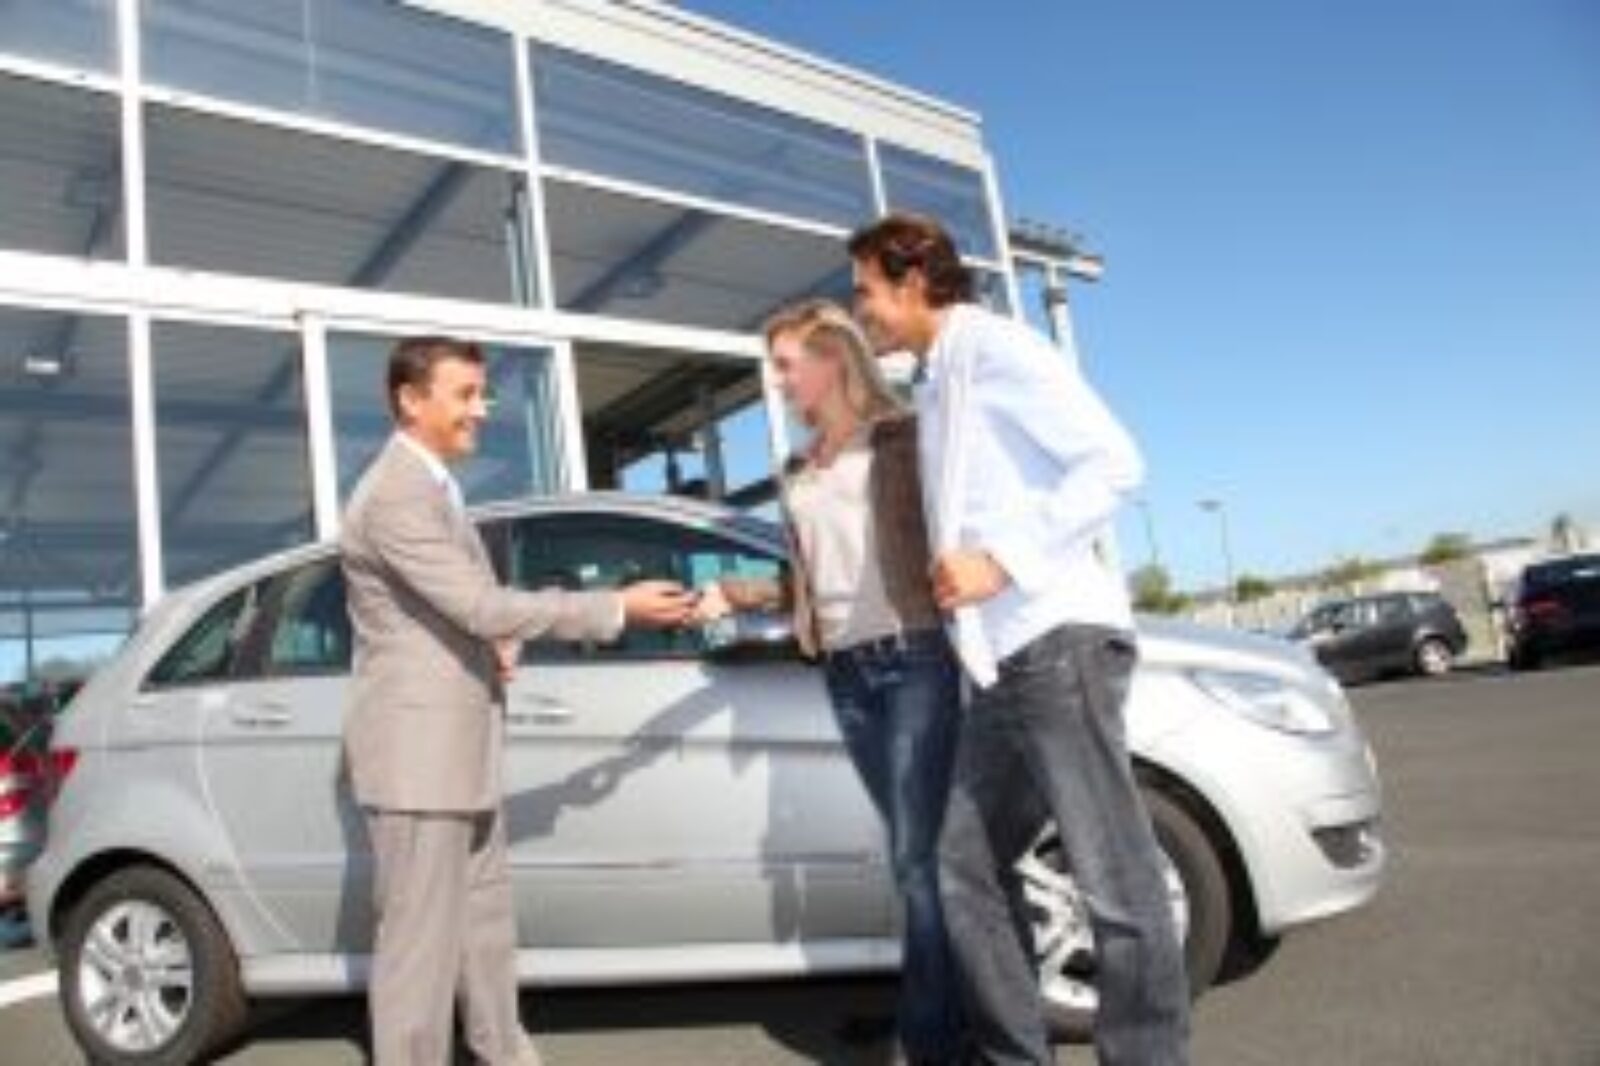 Search Marketing Priorities for Auto / Car Dealerships